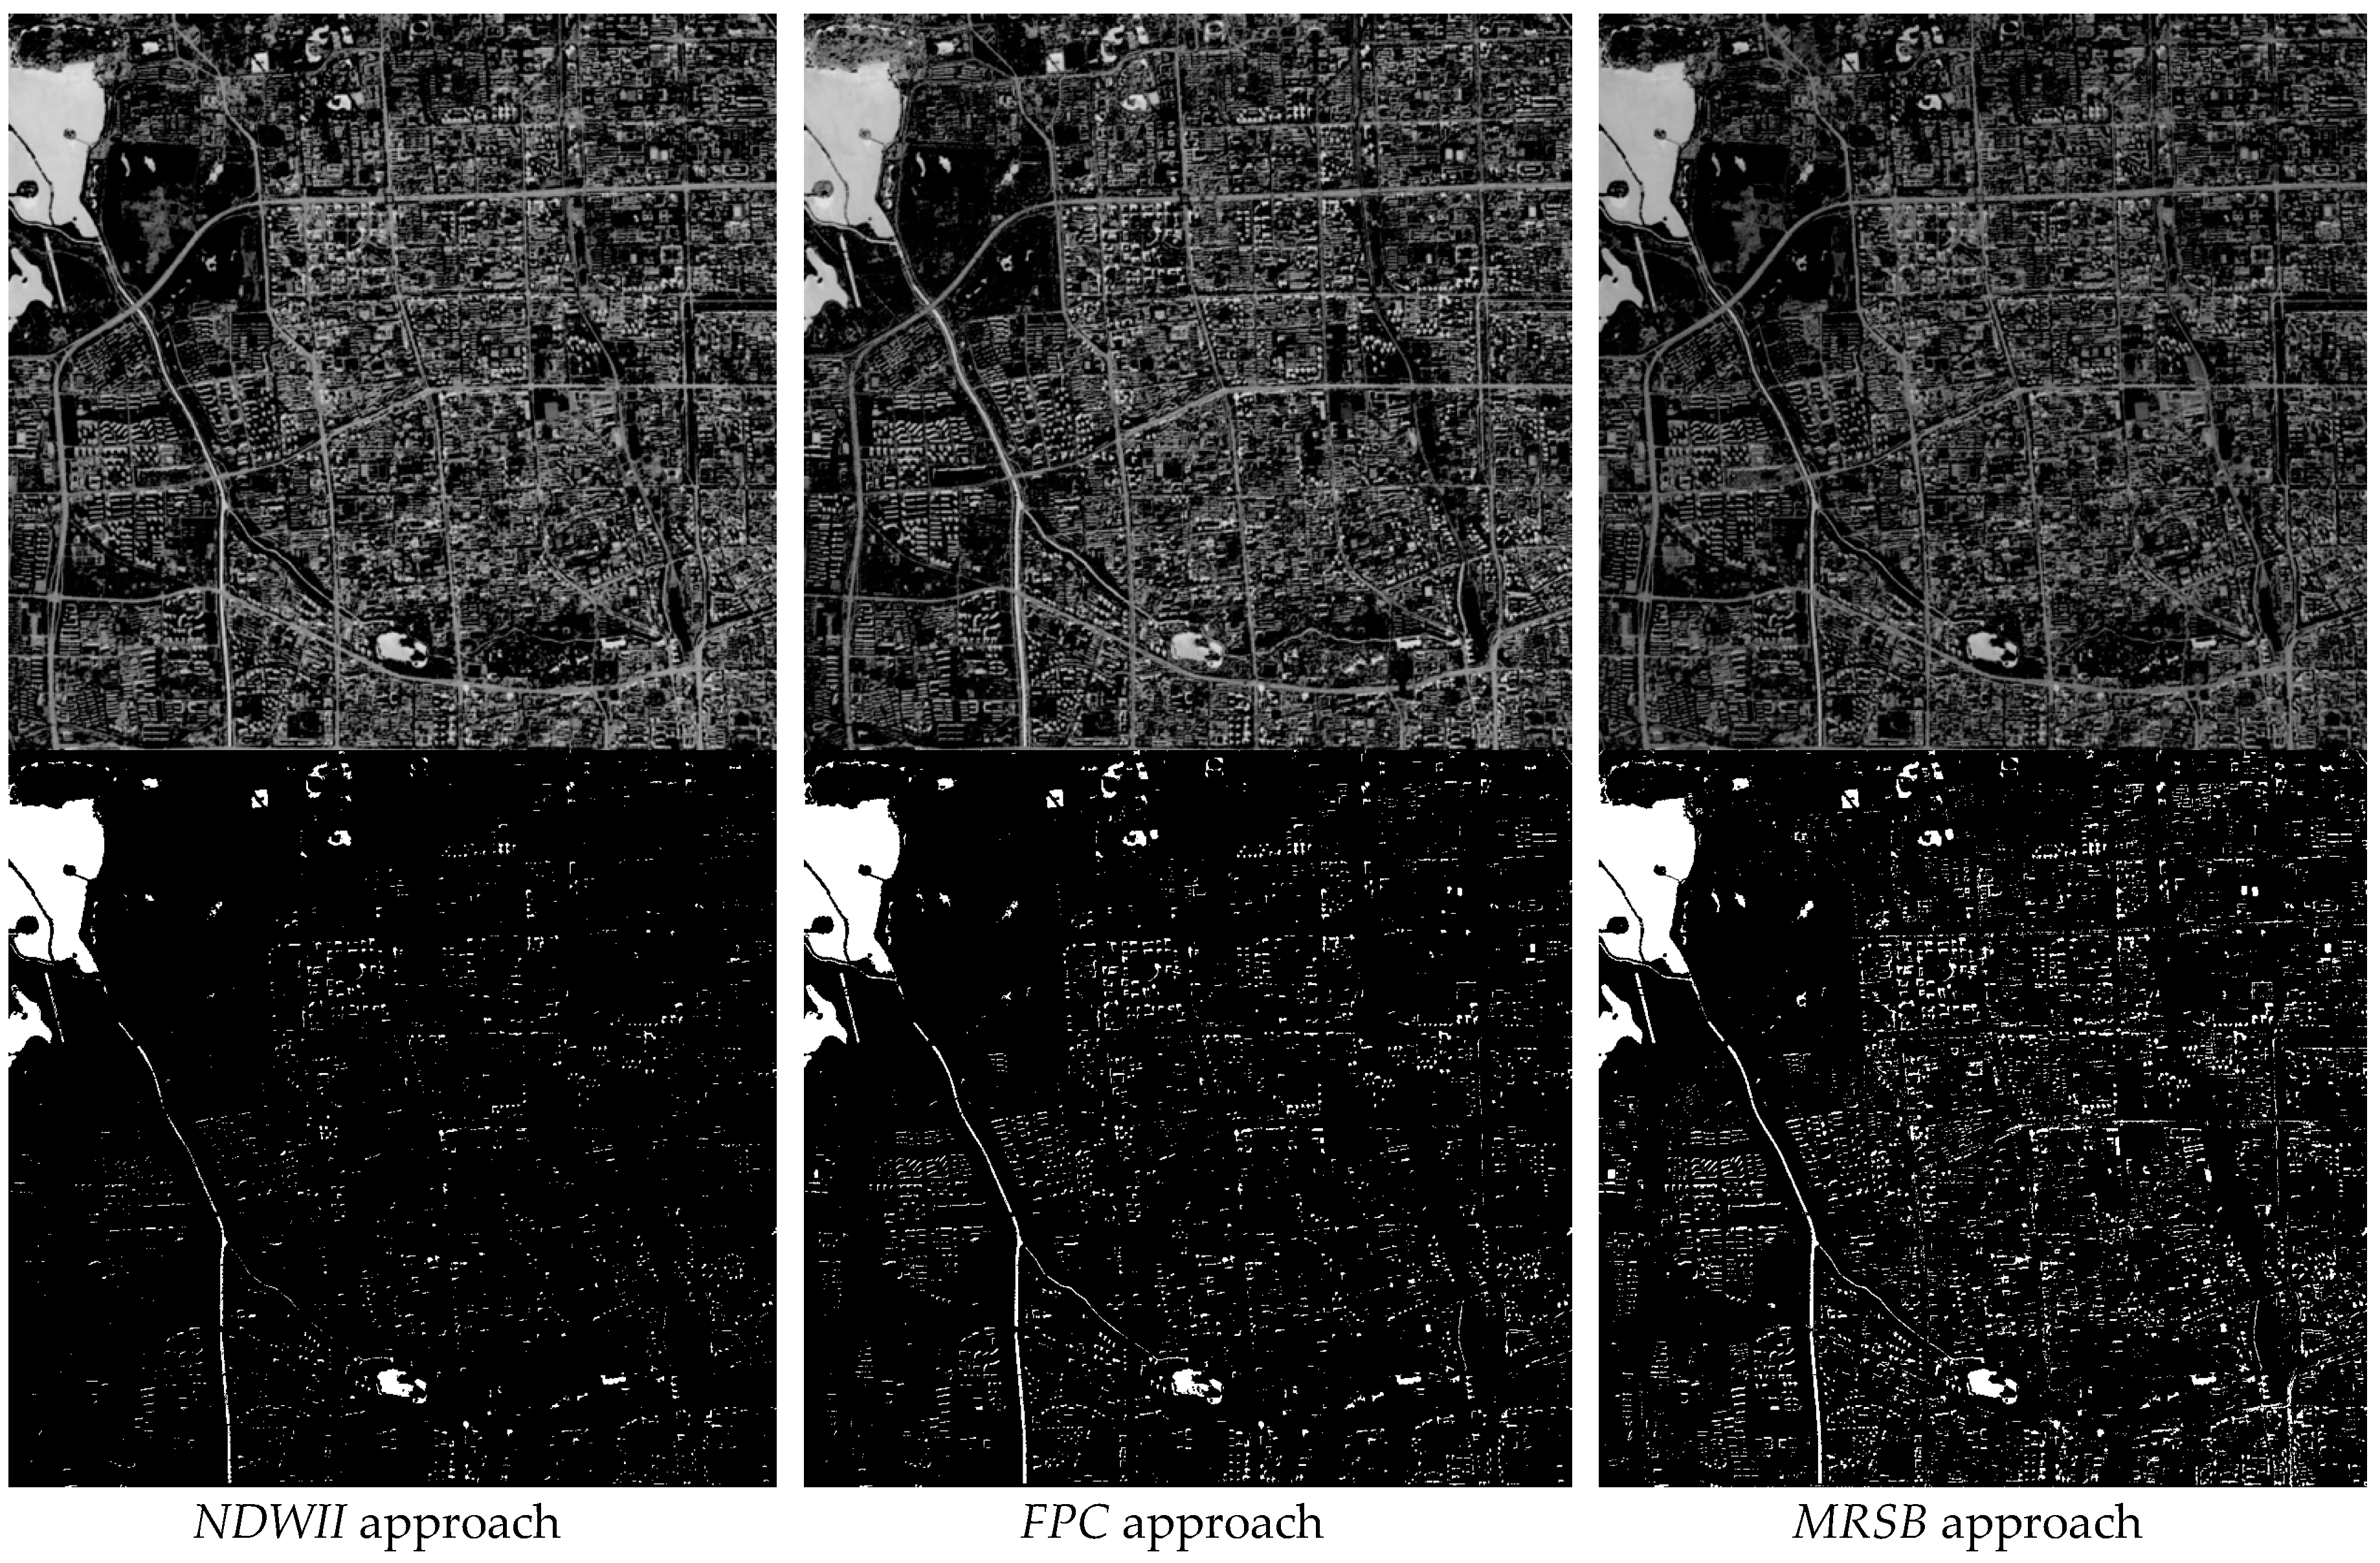 Remote Sensing | Free Full-Text | Mapping of Urban Surface Water Bodies  from Sentinel-2 MSI Imagery at 10 m Resolution via NDWI-Based Image  Sharpening | HTML